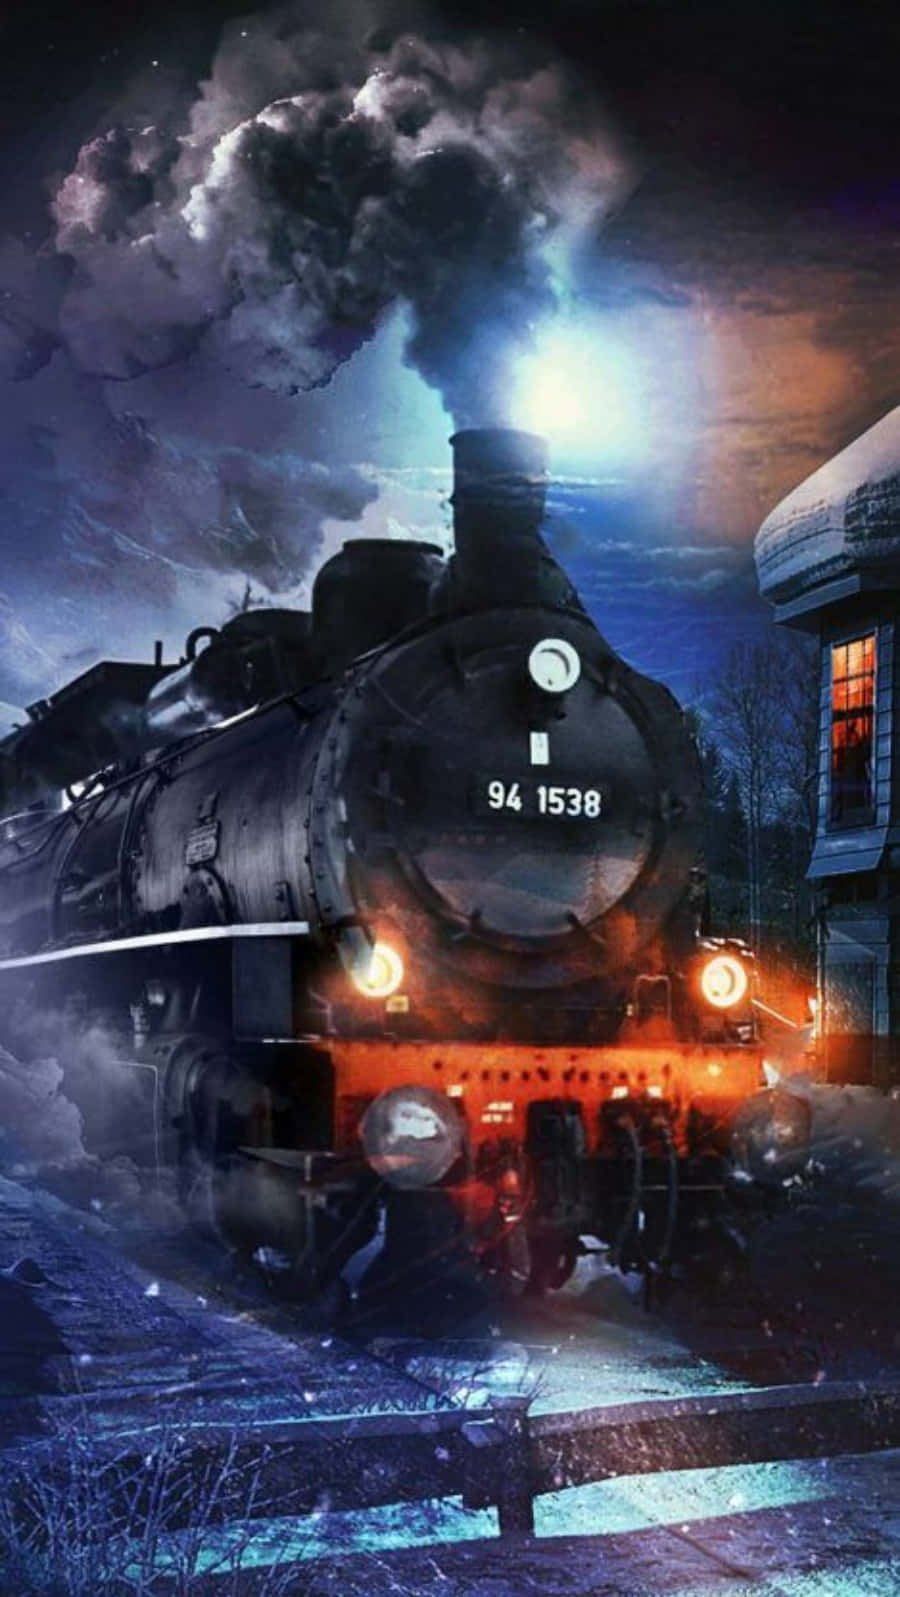 Jump aboard a magical journey with The Hogwarts Express Train. Wallpaper